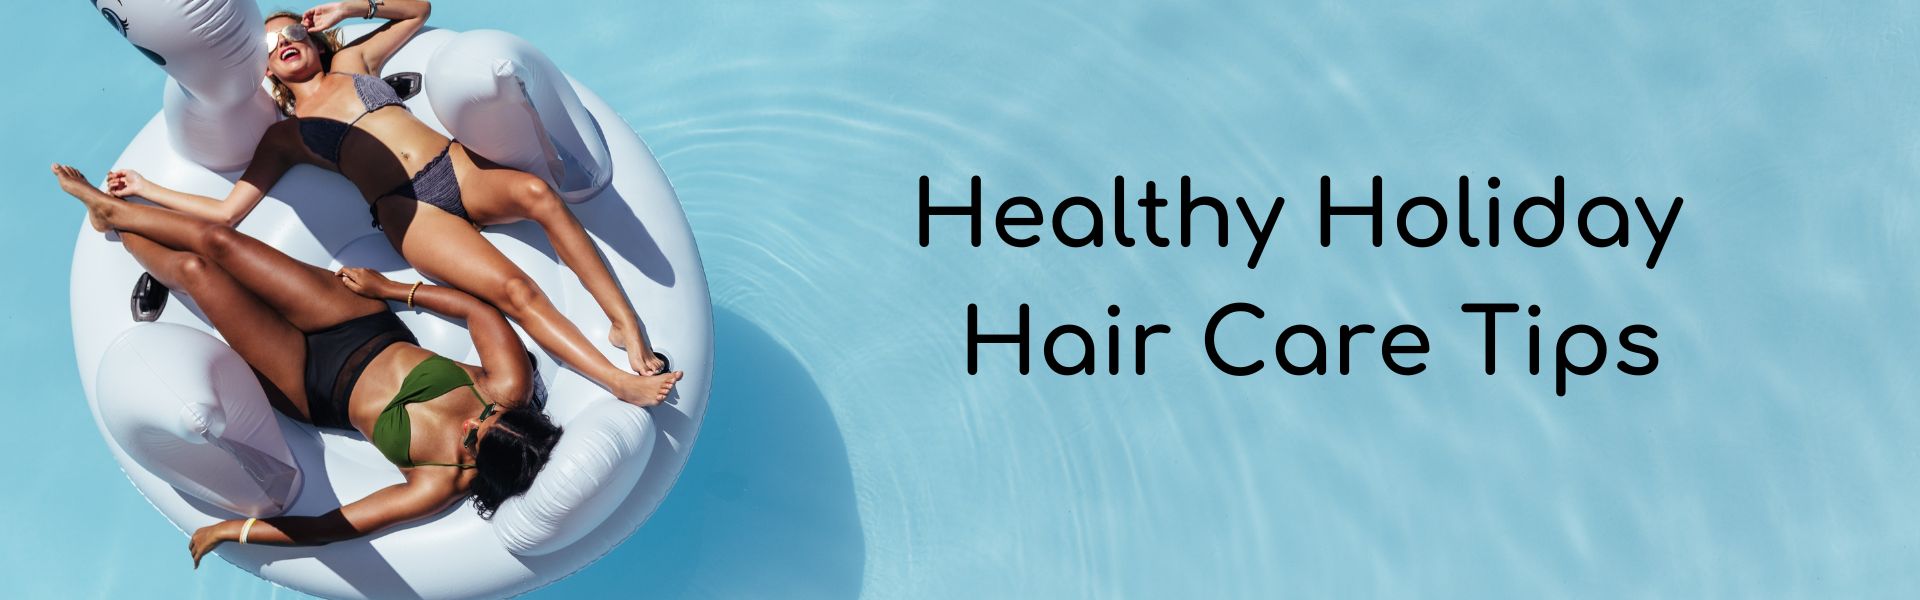 Healthy Holiday Hair Care Tips